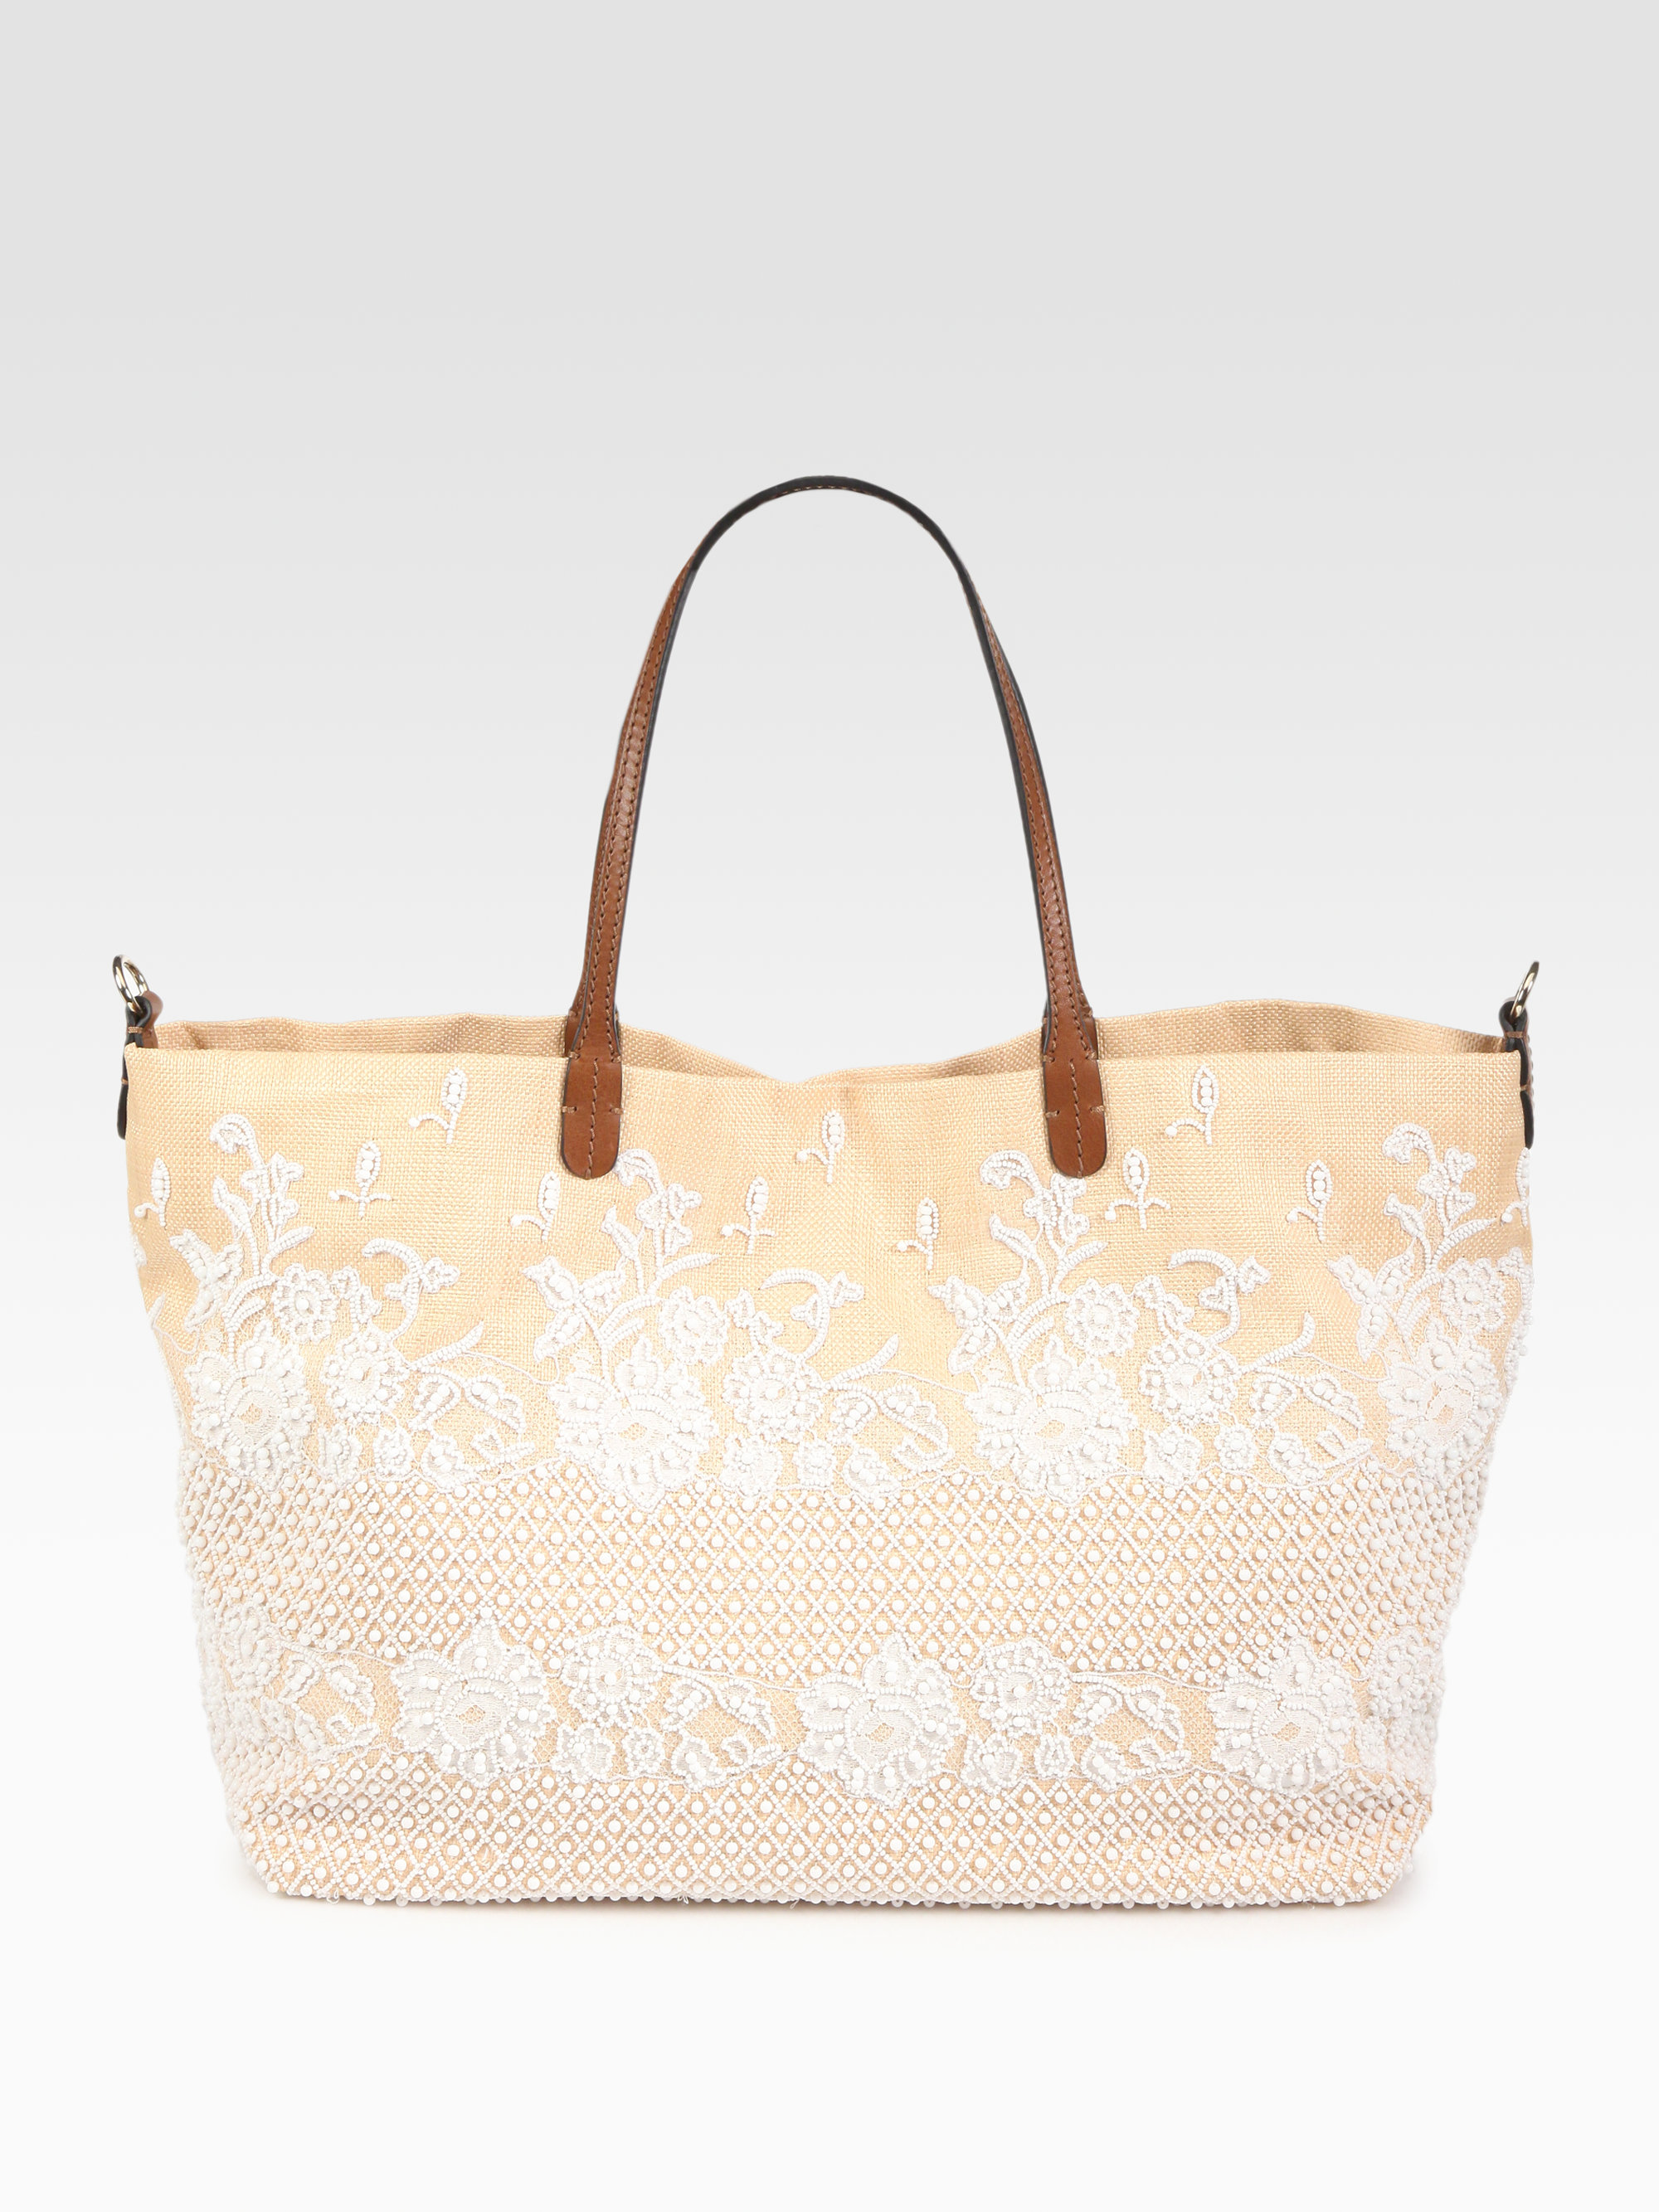 Black Lace Tote Bags | IUCN Water